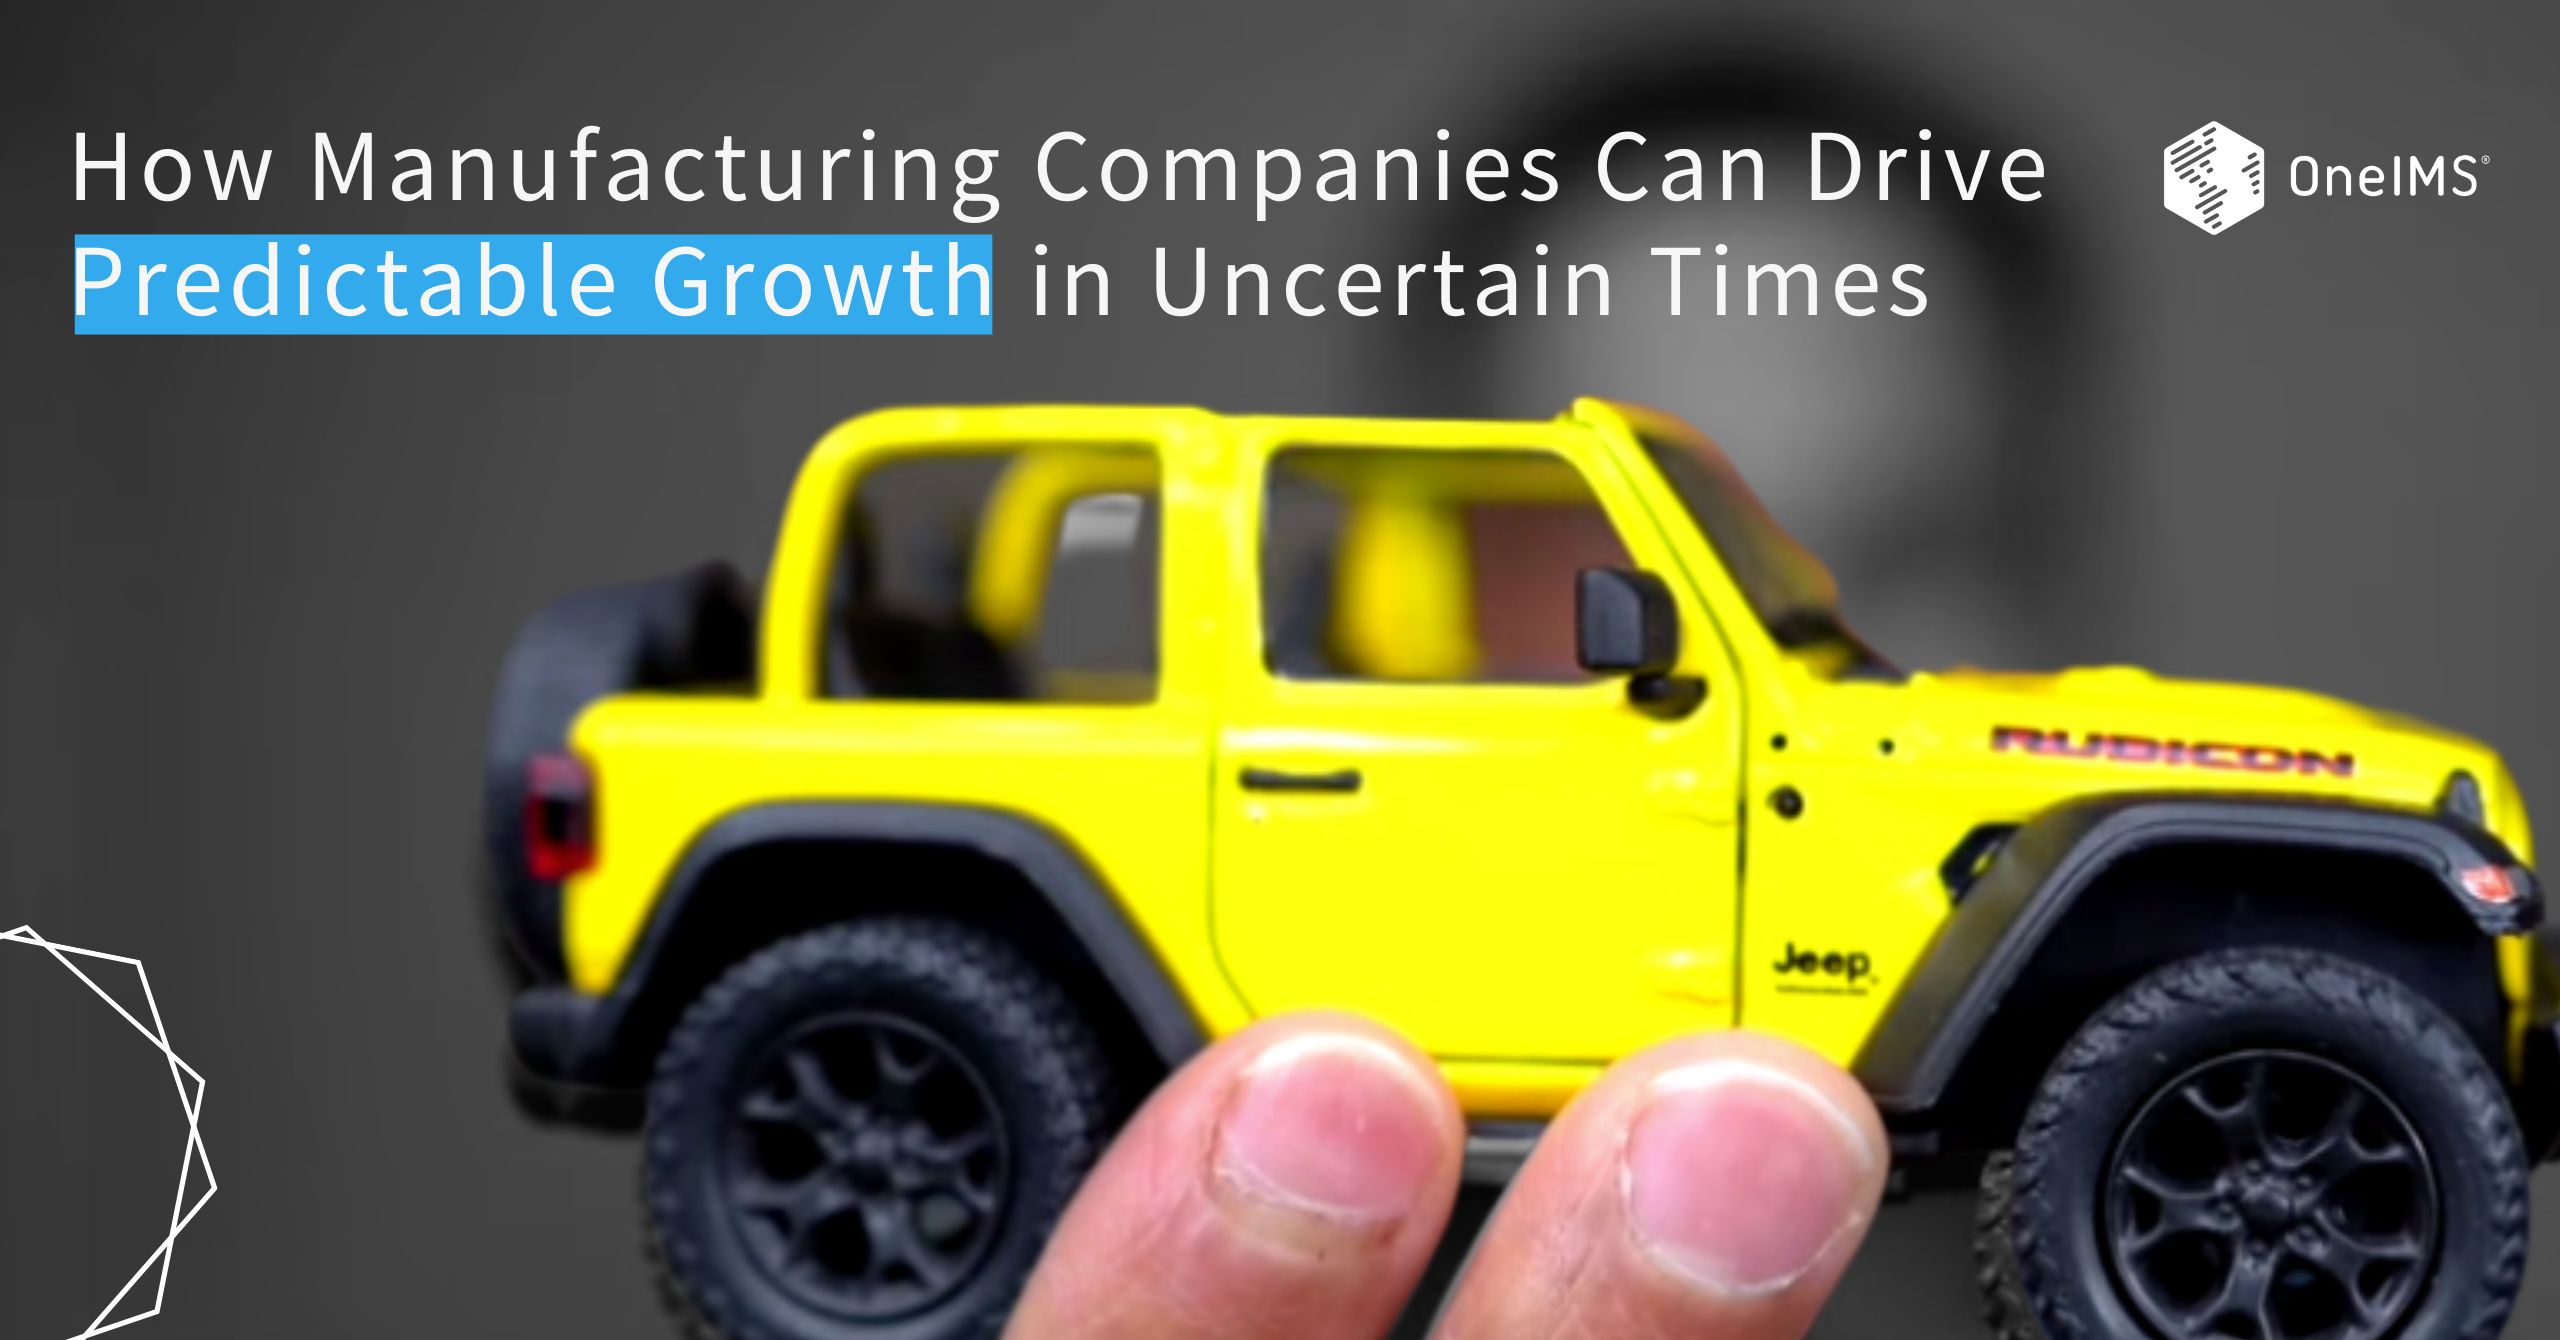 Predictable Growth for Manufacturing Companies